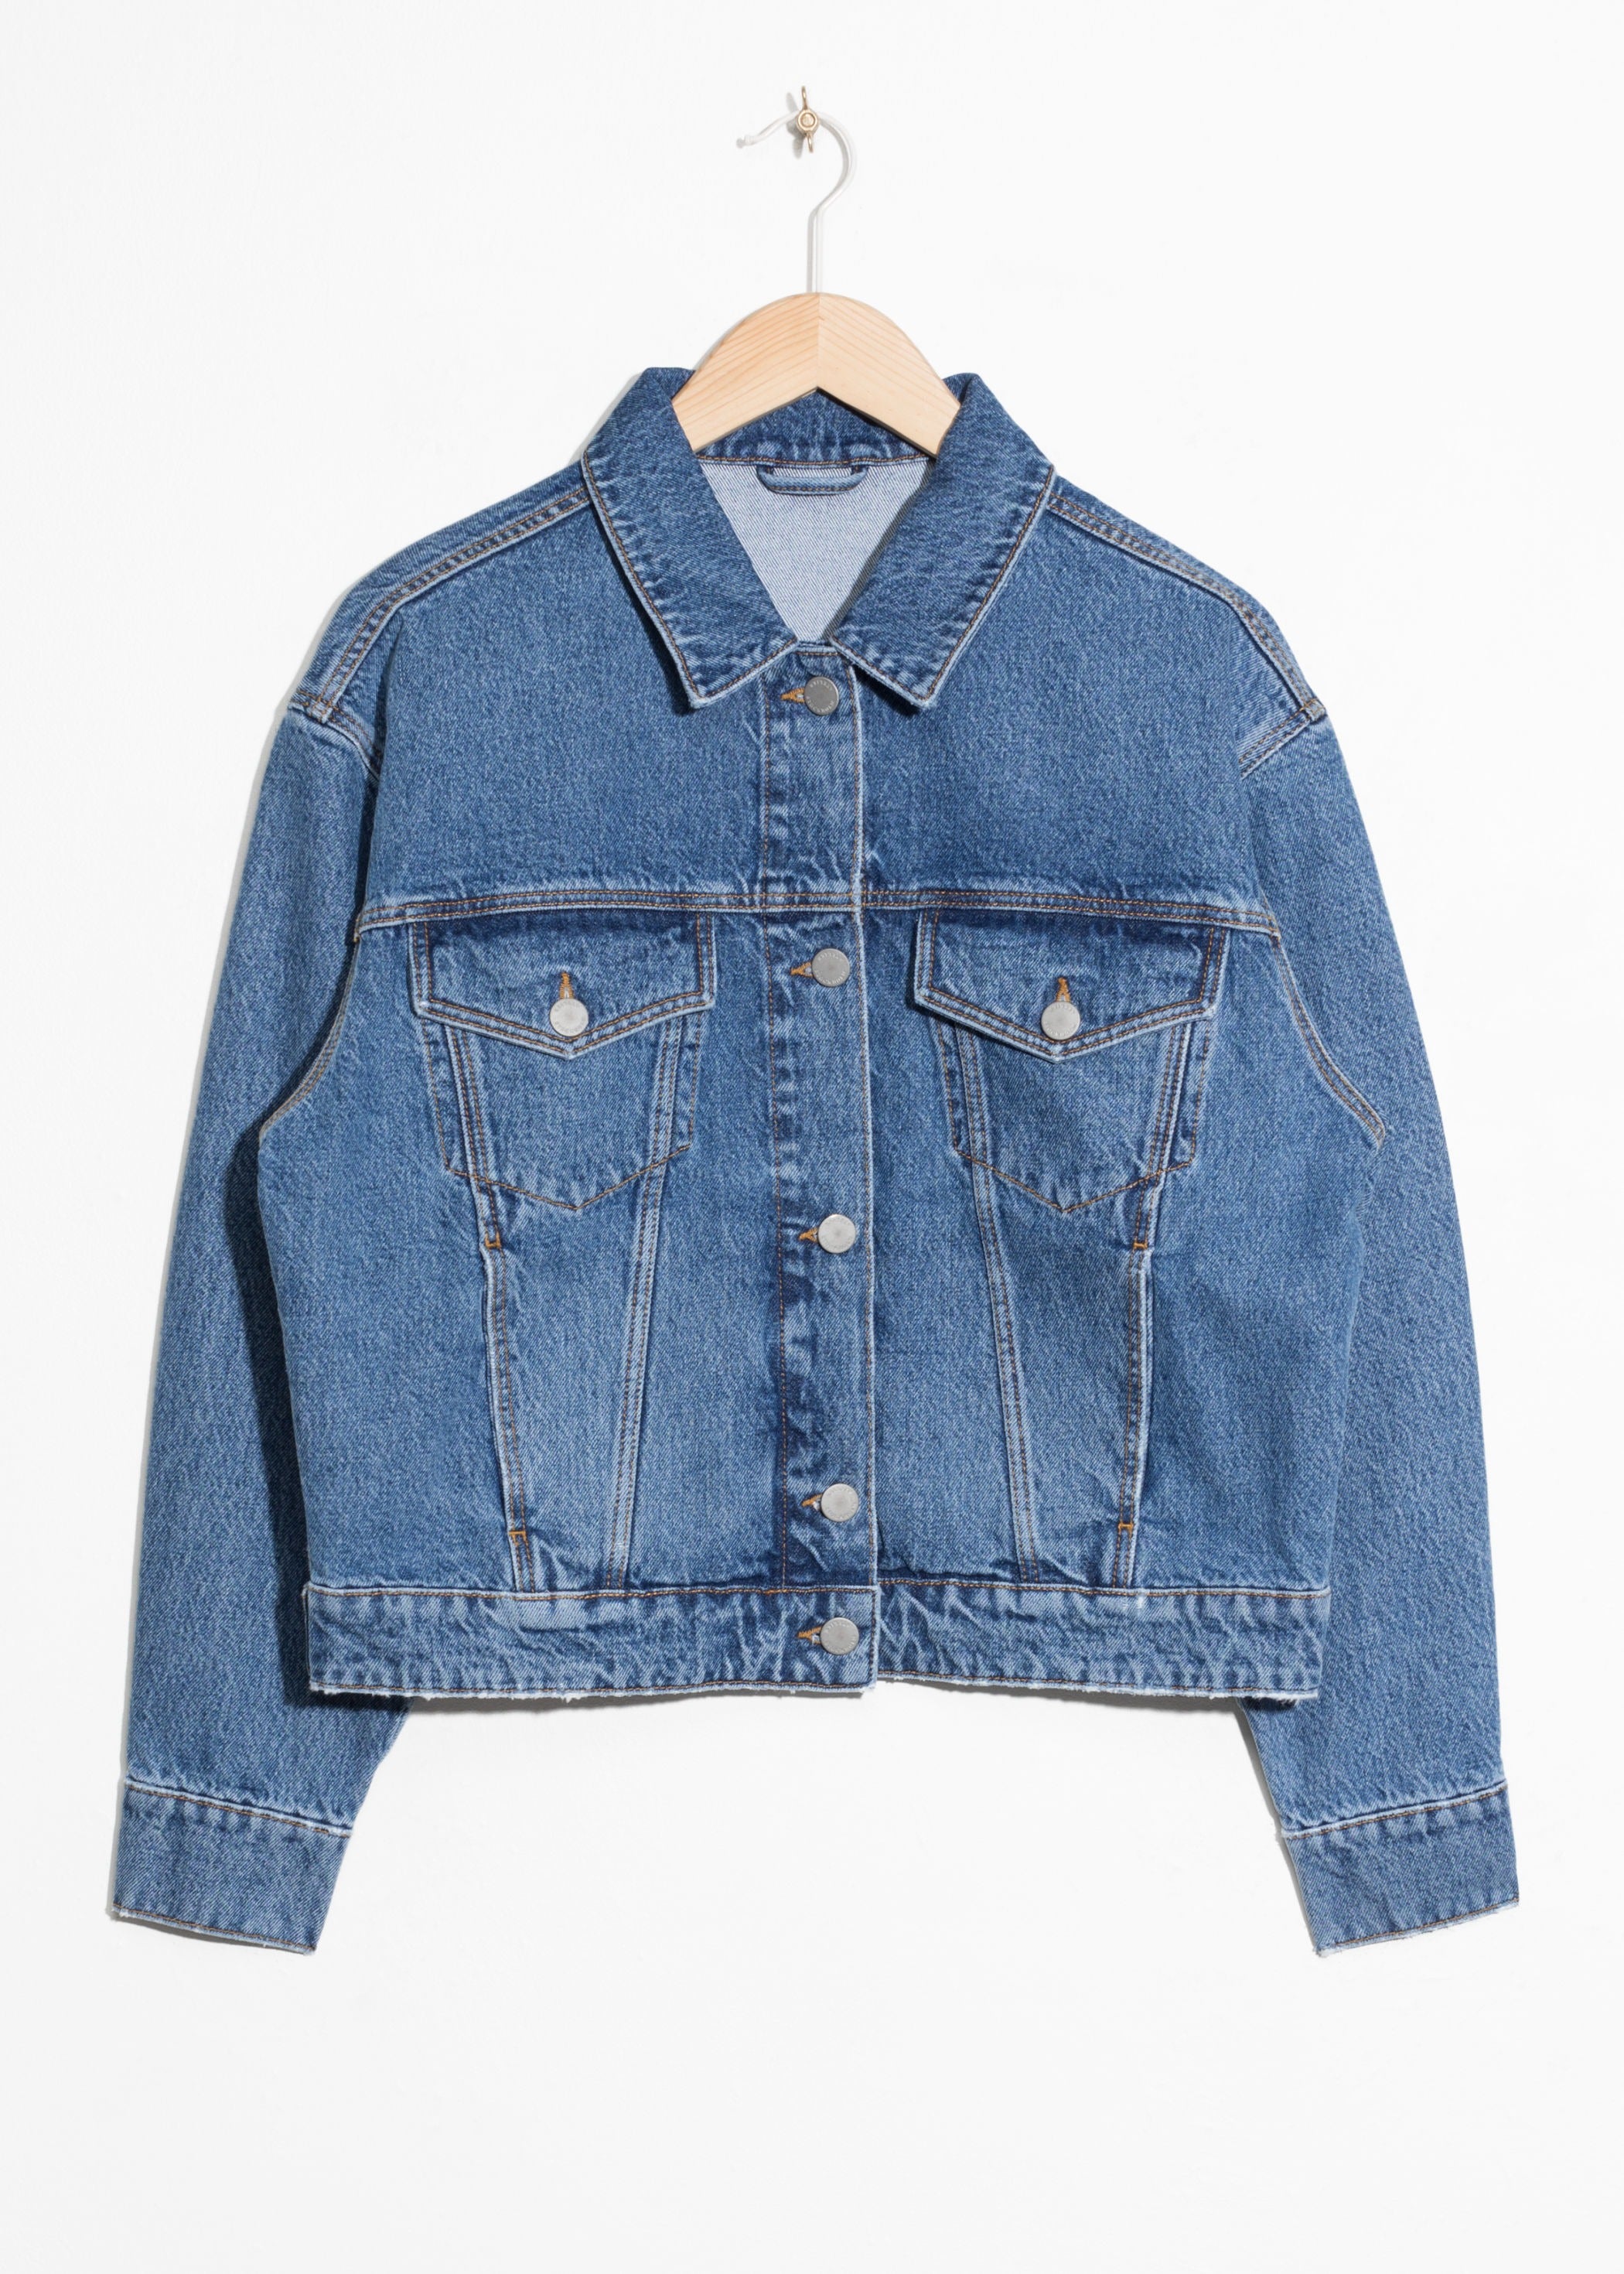 & Other Stories + Cropped Denim Jacket